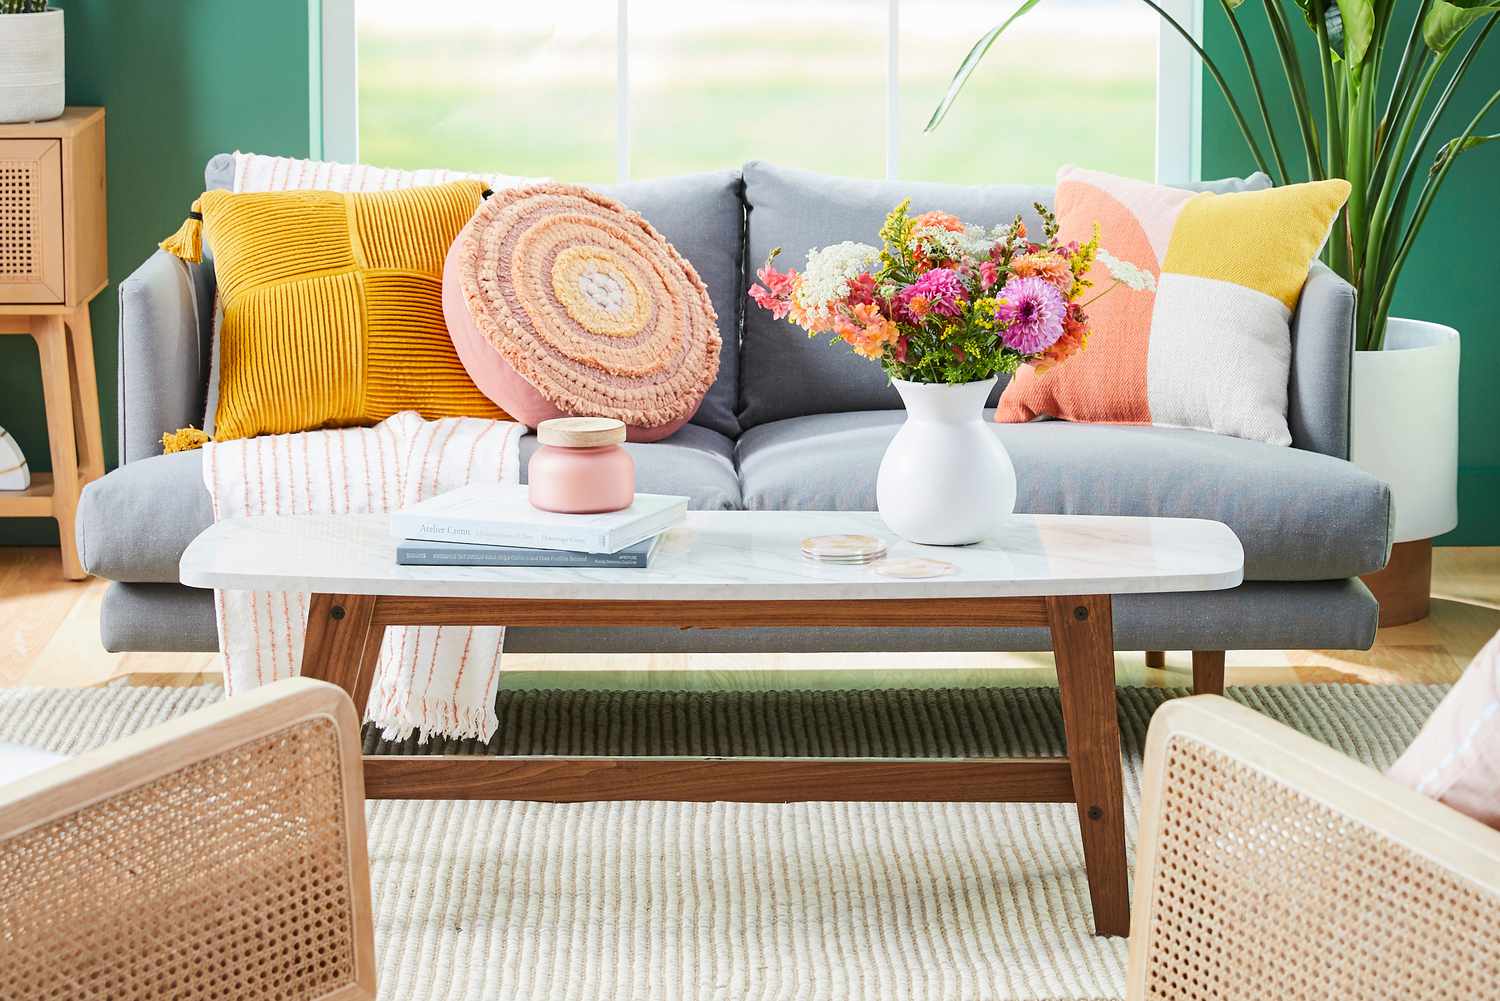 Flowers on coffee table as centerpiece of colorful room